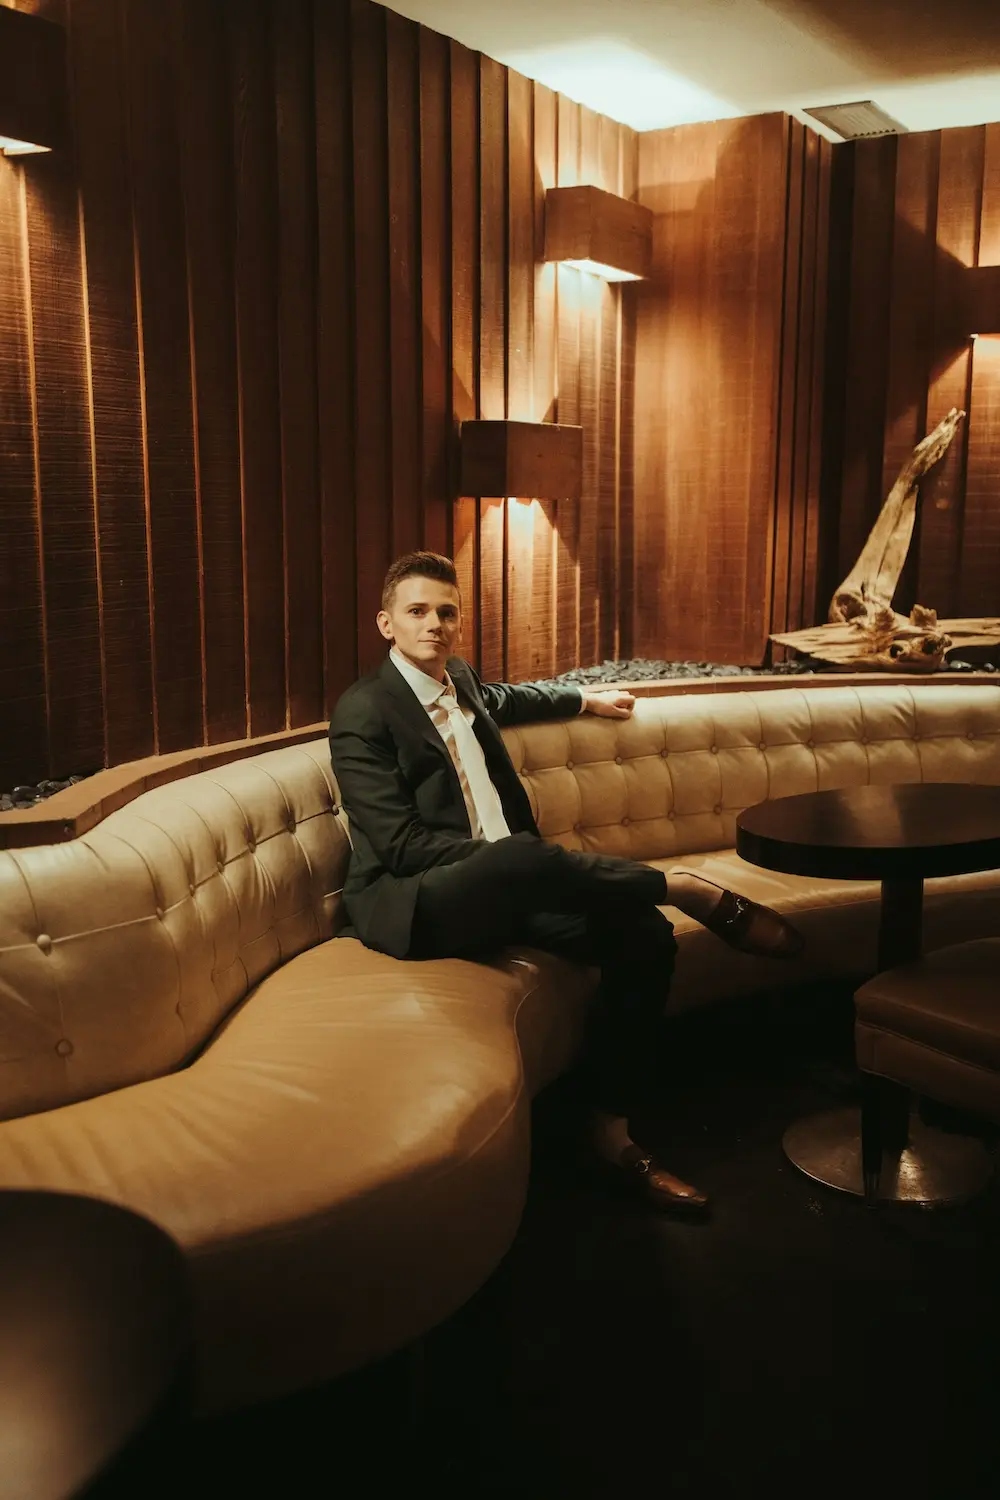 A picture of John, seated on a couch in a lounge wearing a dark green suit.